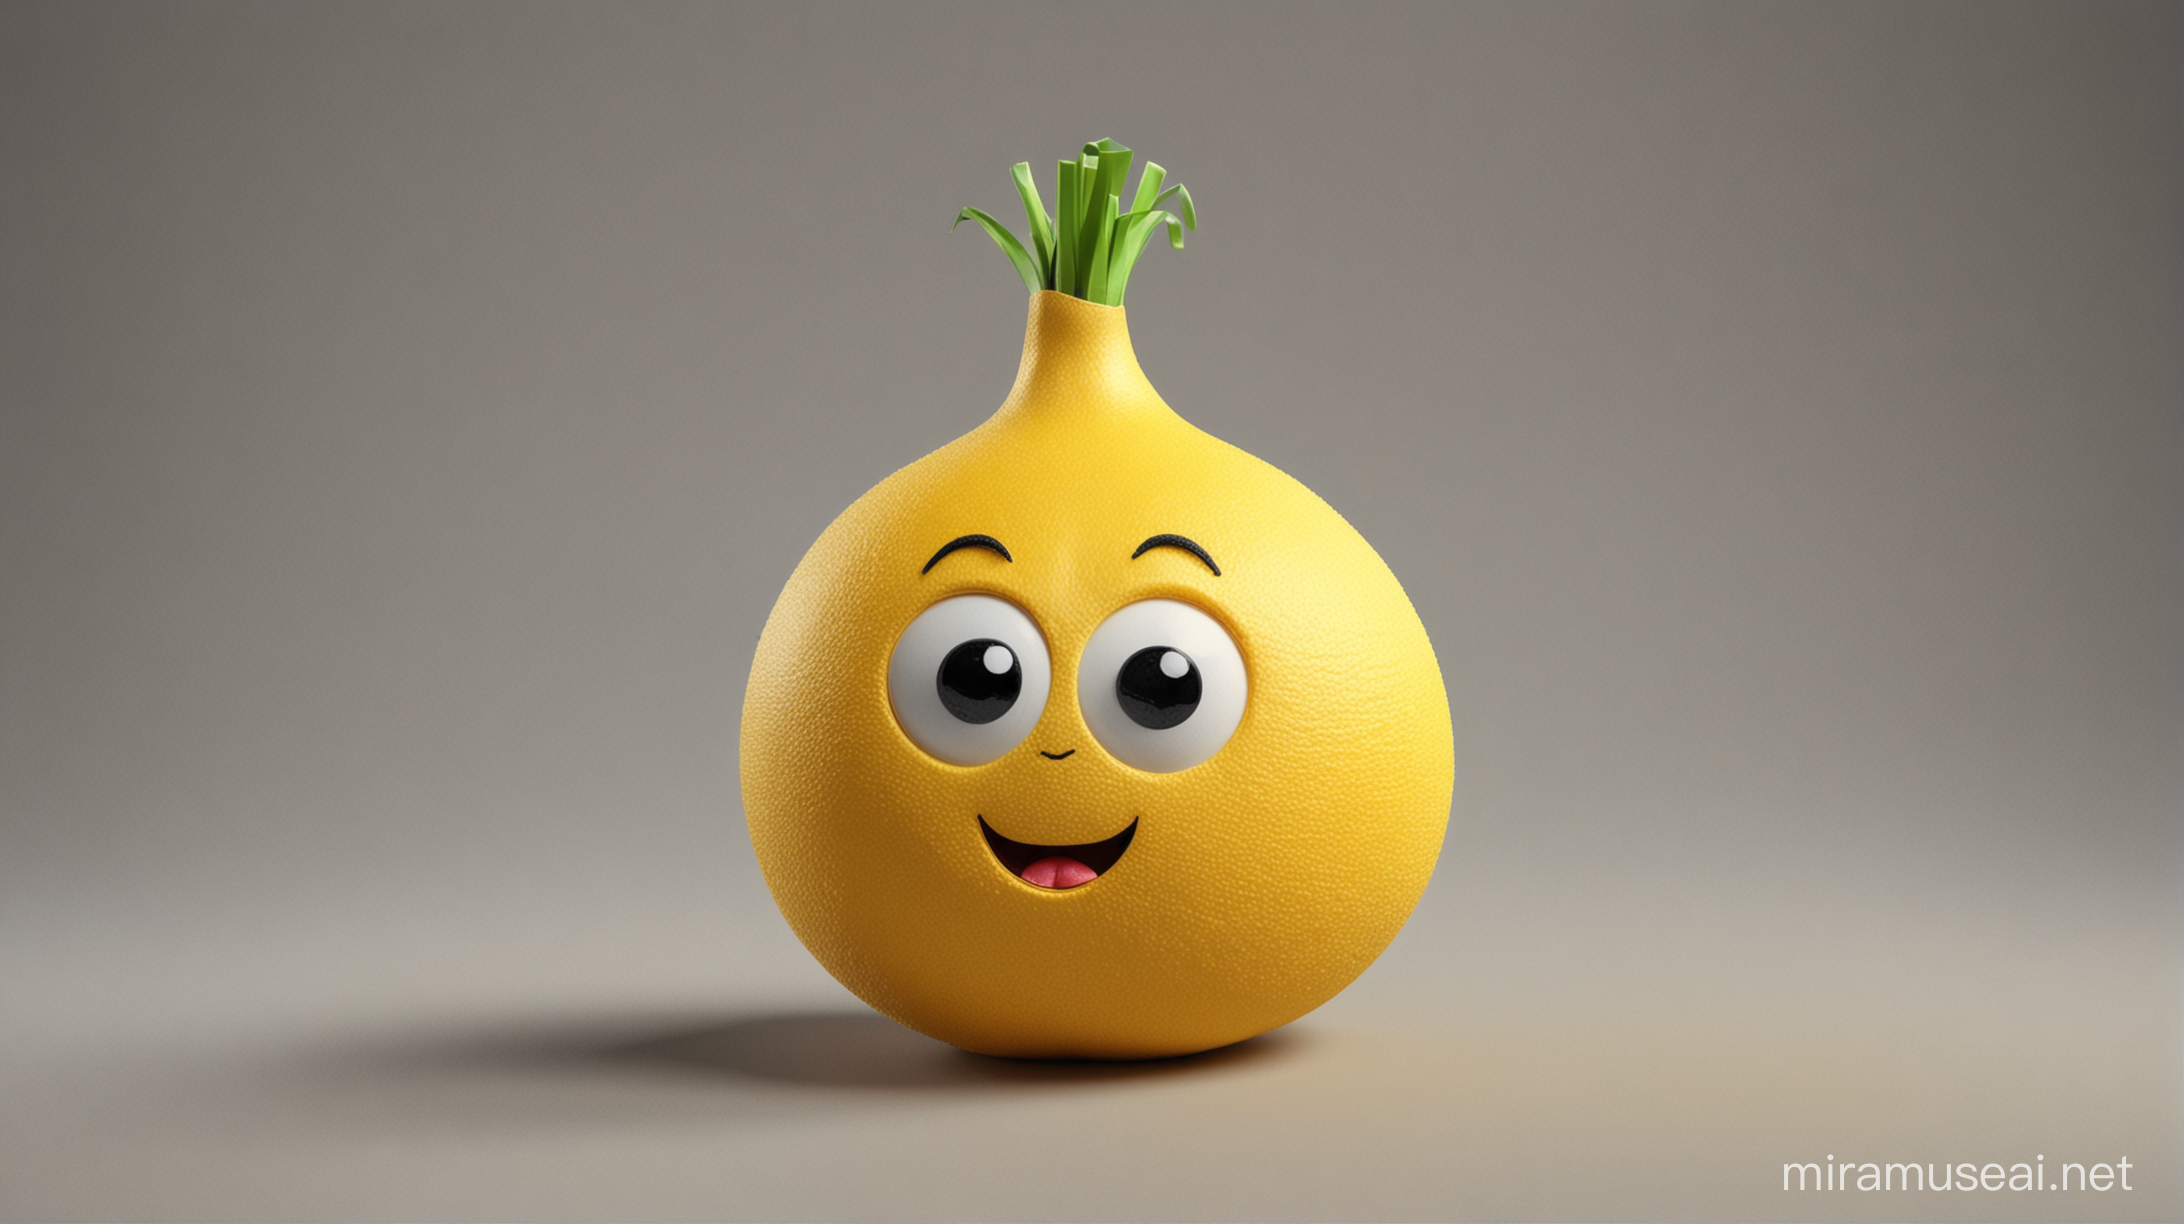 make yellow 3D, stuffed toy the shape of an onion, with no mouth, two simple black cylinders for eyes, plain background